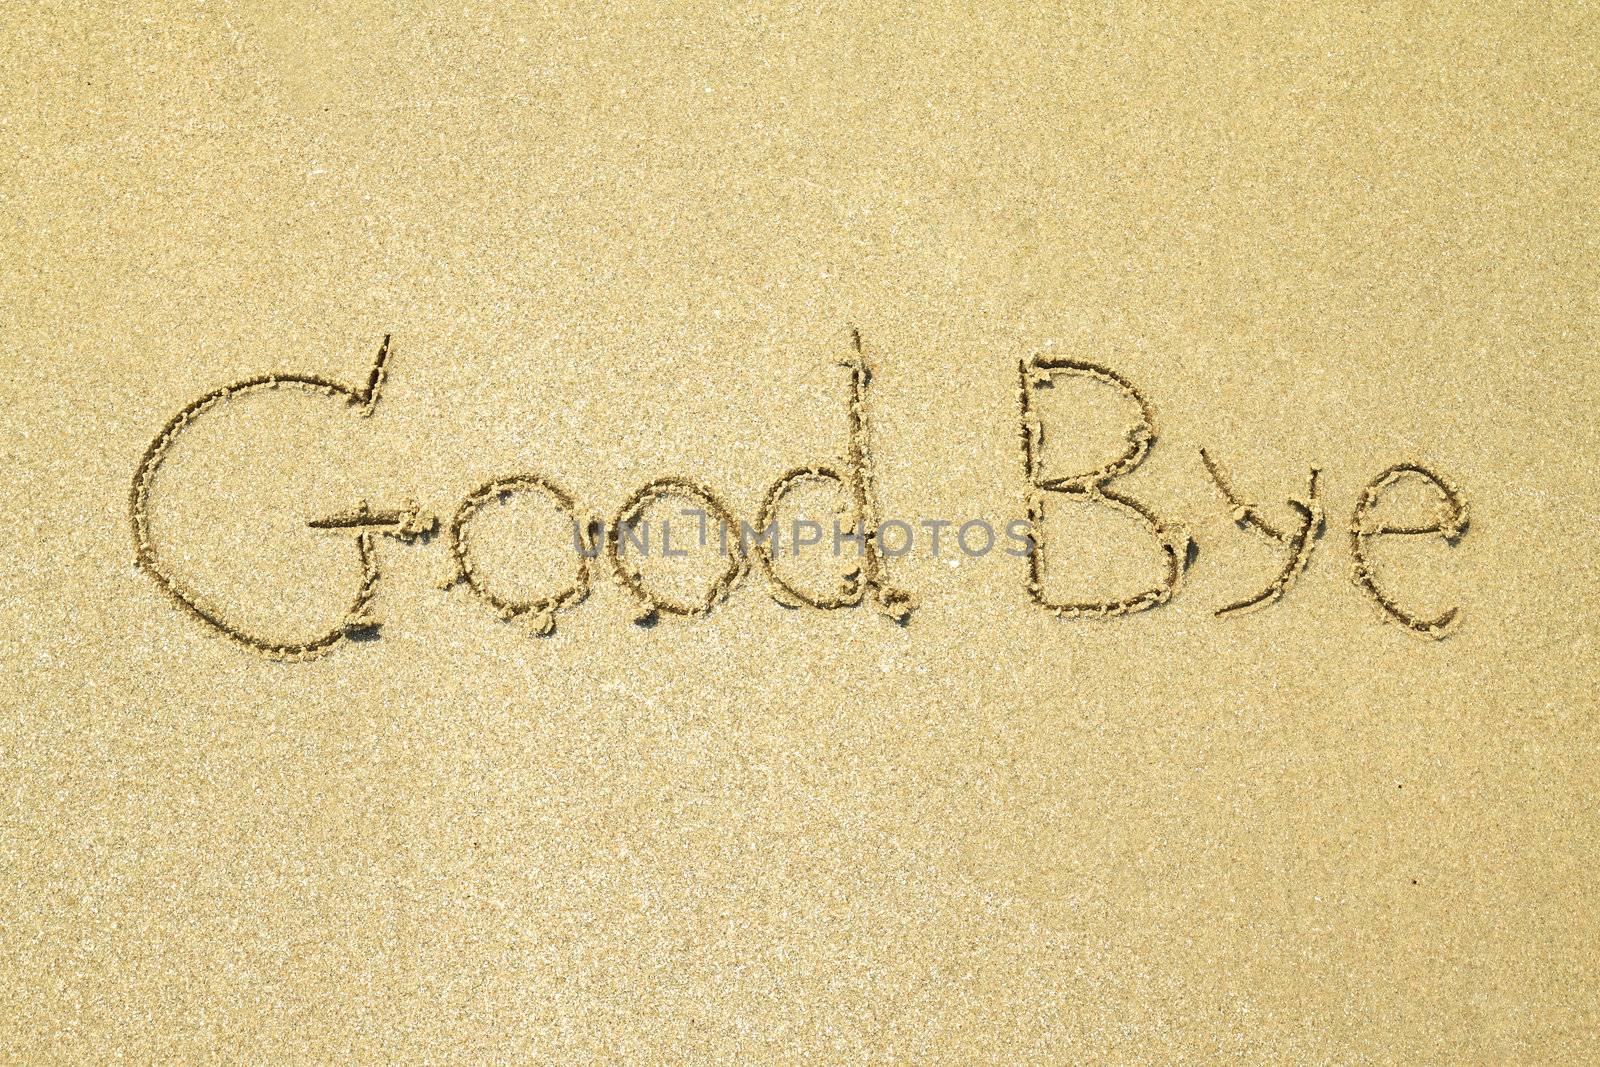 Good bye written on the sand at the beach